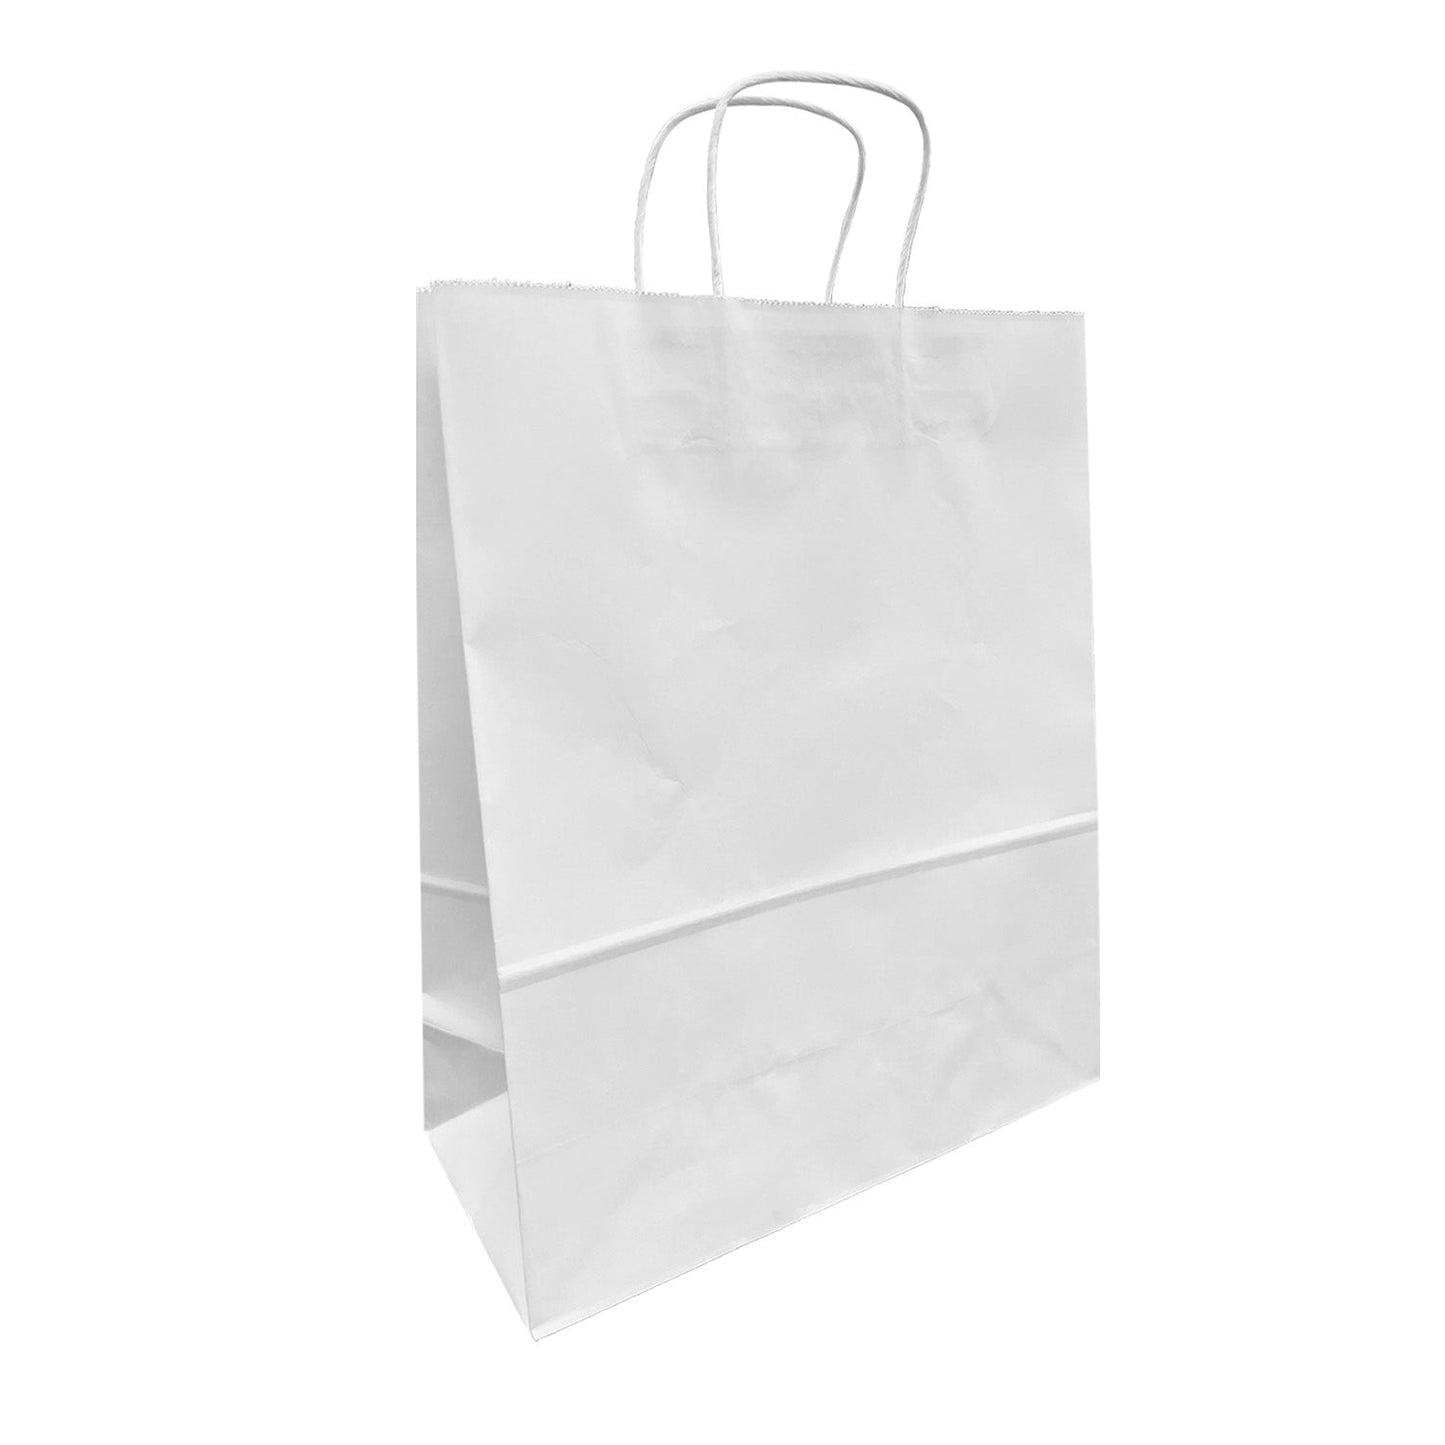 250 Pcs, Traveler,  13x6x16 inches, White Euro Tote Paper Bags, with Rope Handle